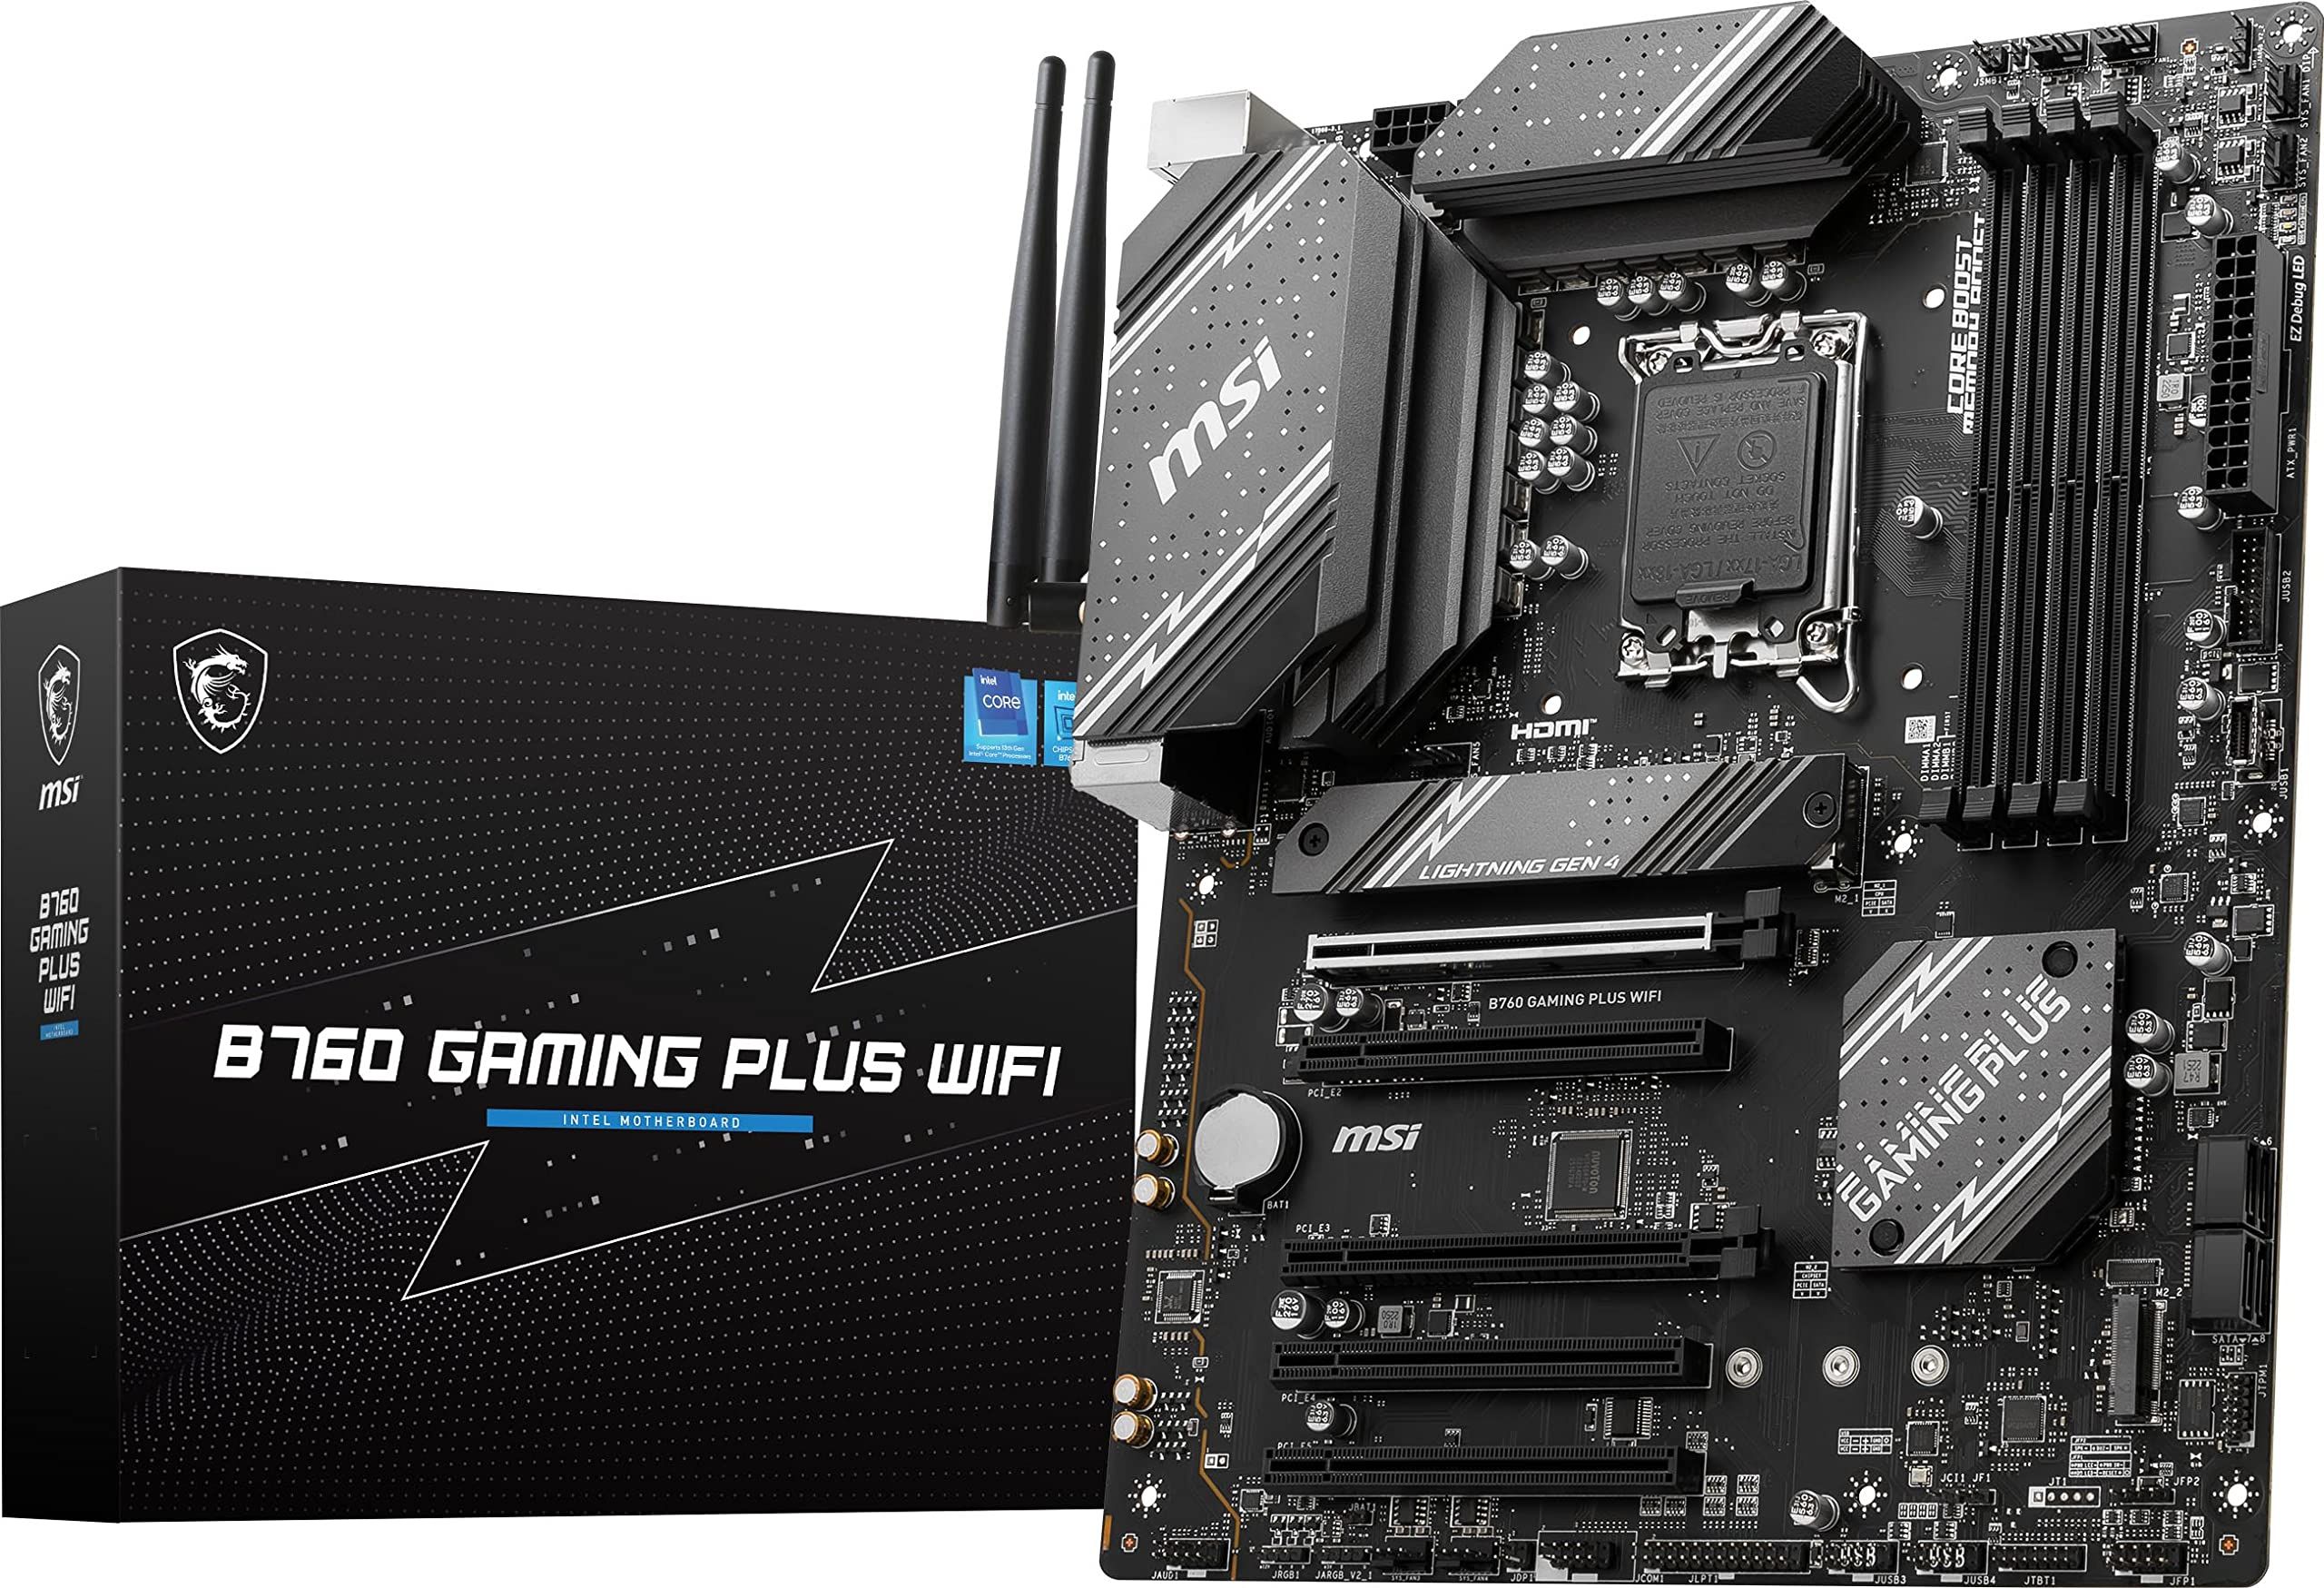 B760 GAMING PLUS WIFI 4x DDR5 LGA1700 1x HDMI™ Support HDMI™ 2.1 with HDR, maximum resolution of 4K 60Hz* 1x DisplayPort Support DP 1.4, maximum resolution of 4K 60Hz* 5x PCI-E x16 slot https://www.msi.com/Motherboard/B760-GAMING-PLUS-WIFI/Specification_2